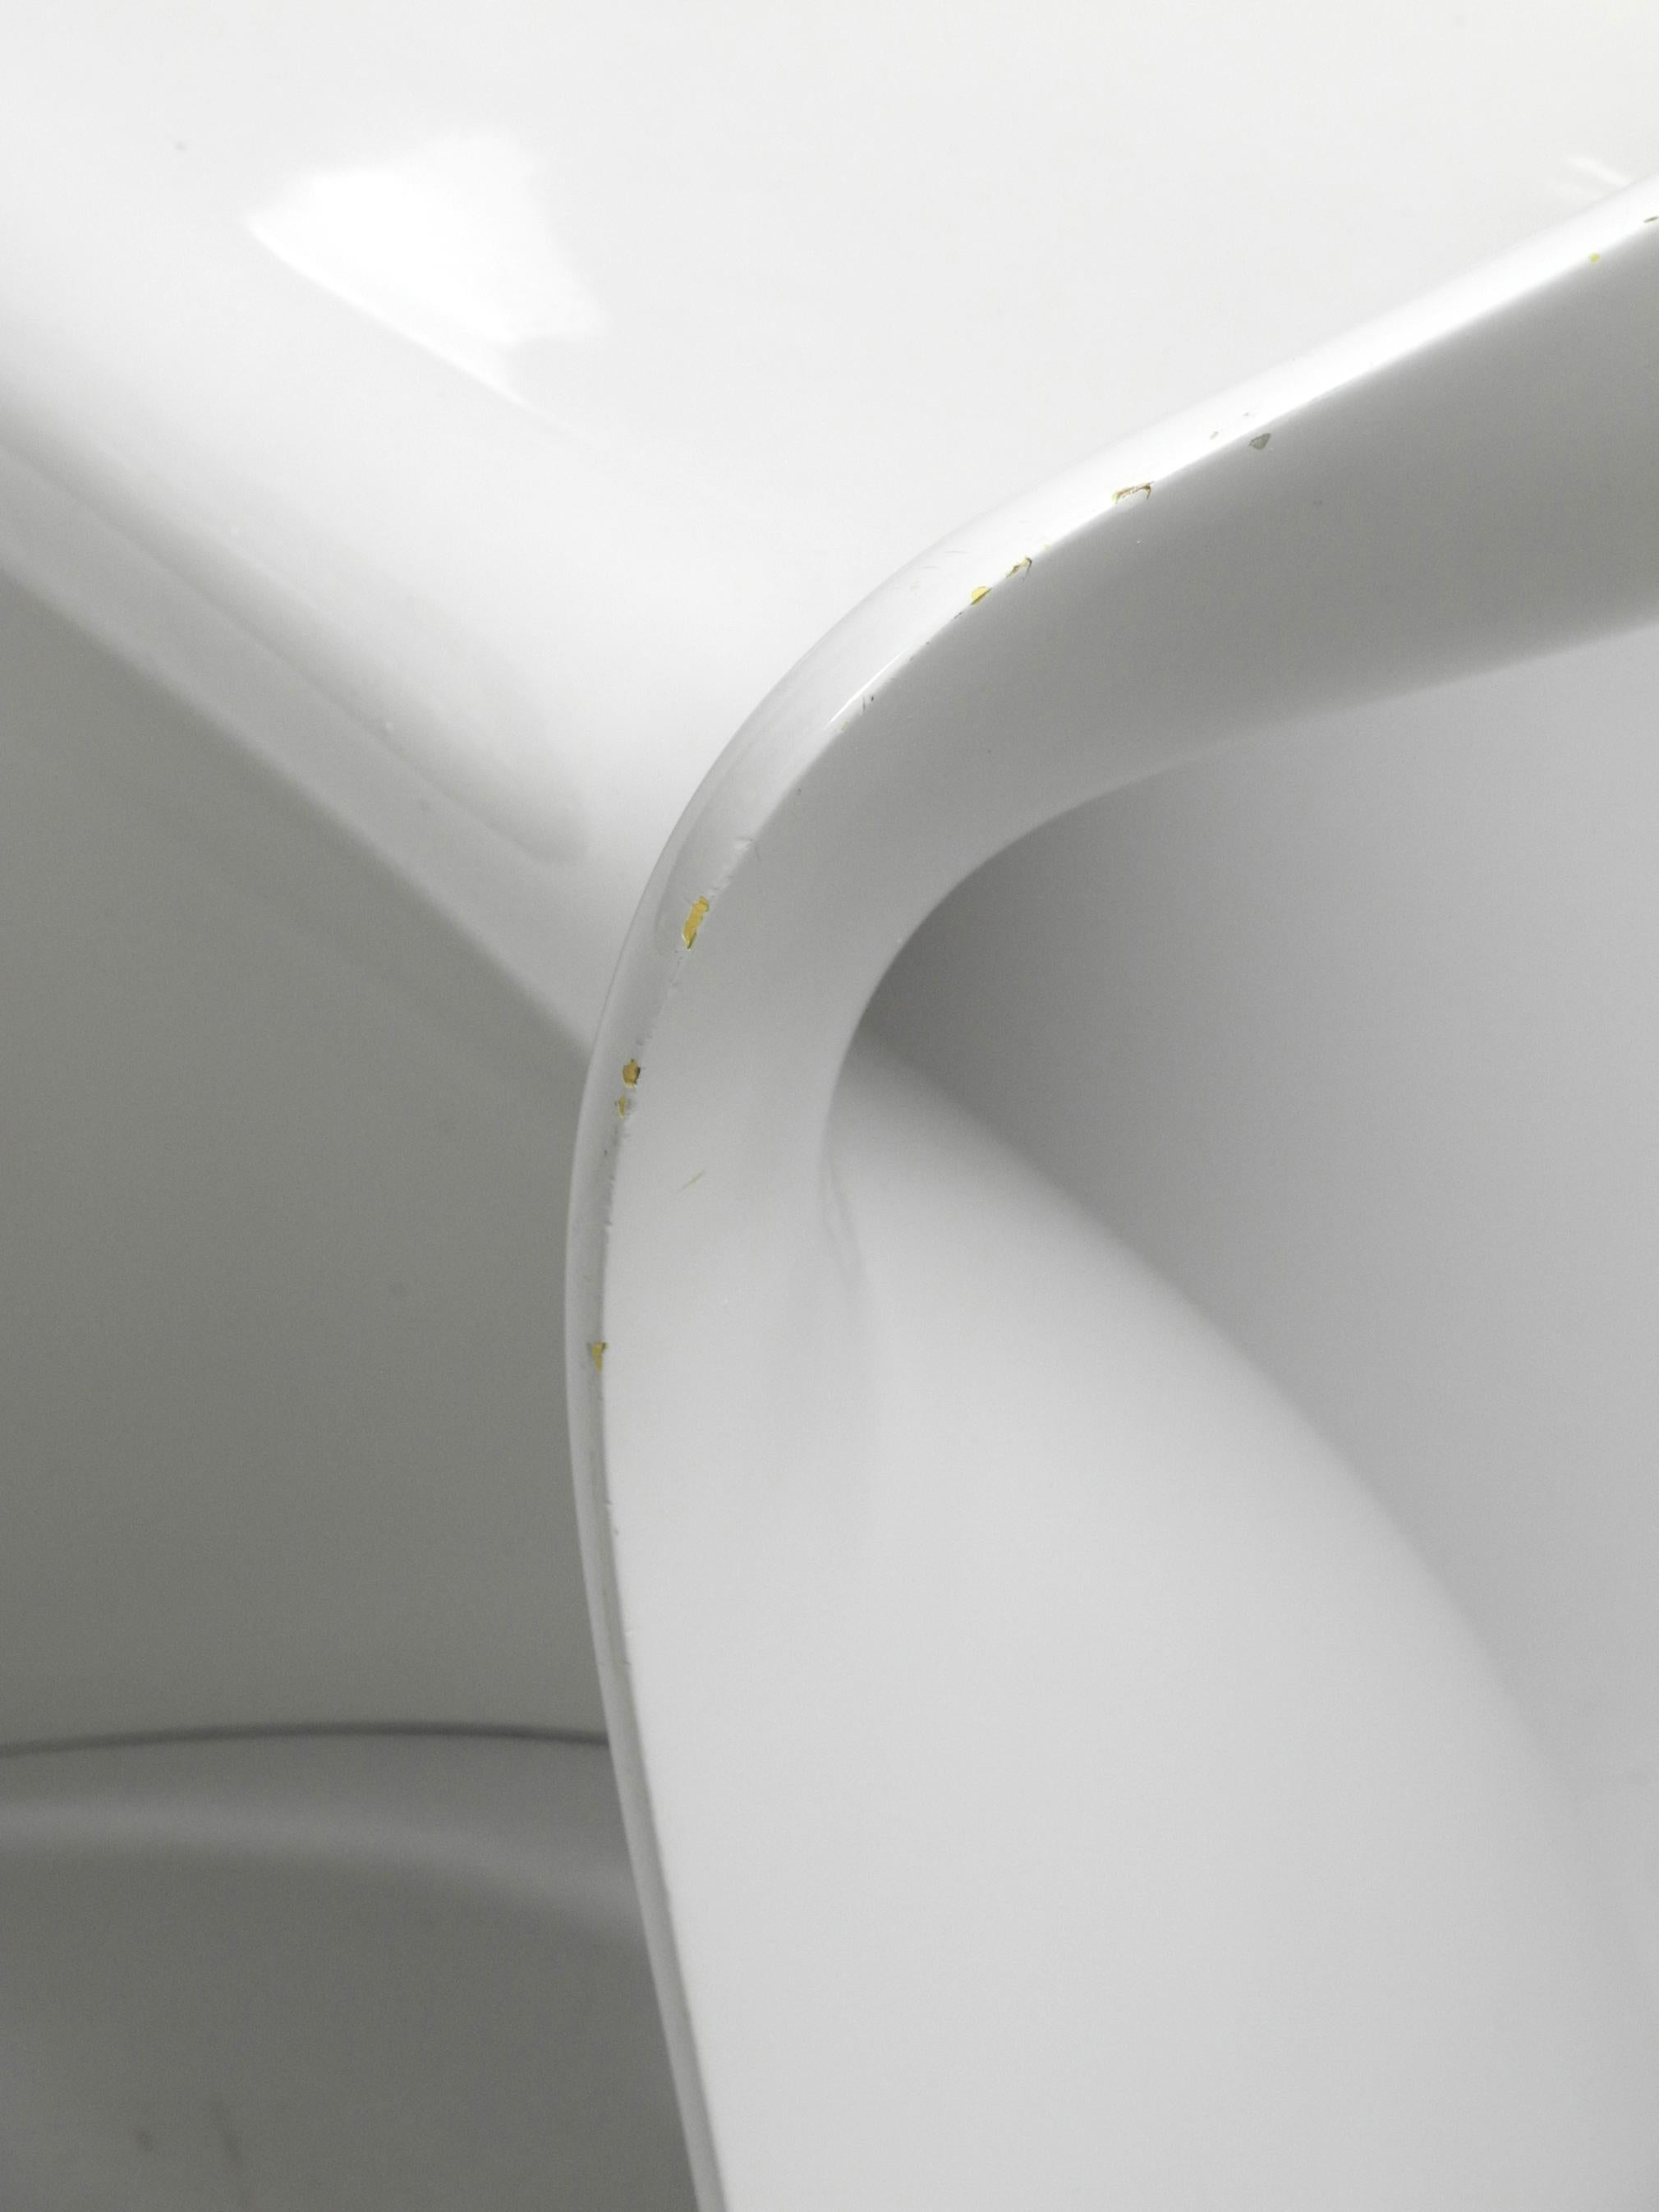 Other Rare White Stool by Winfried Staeb from the 1970s for Form + Life Collection